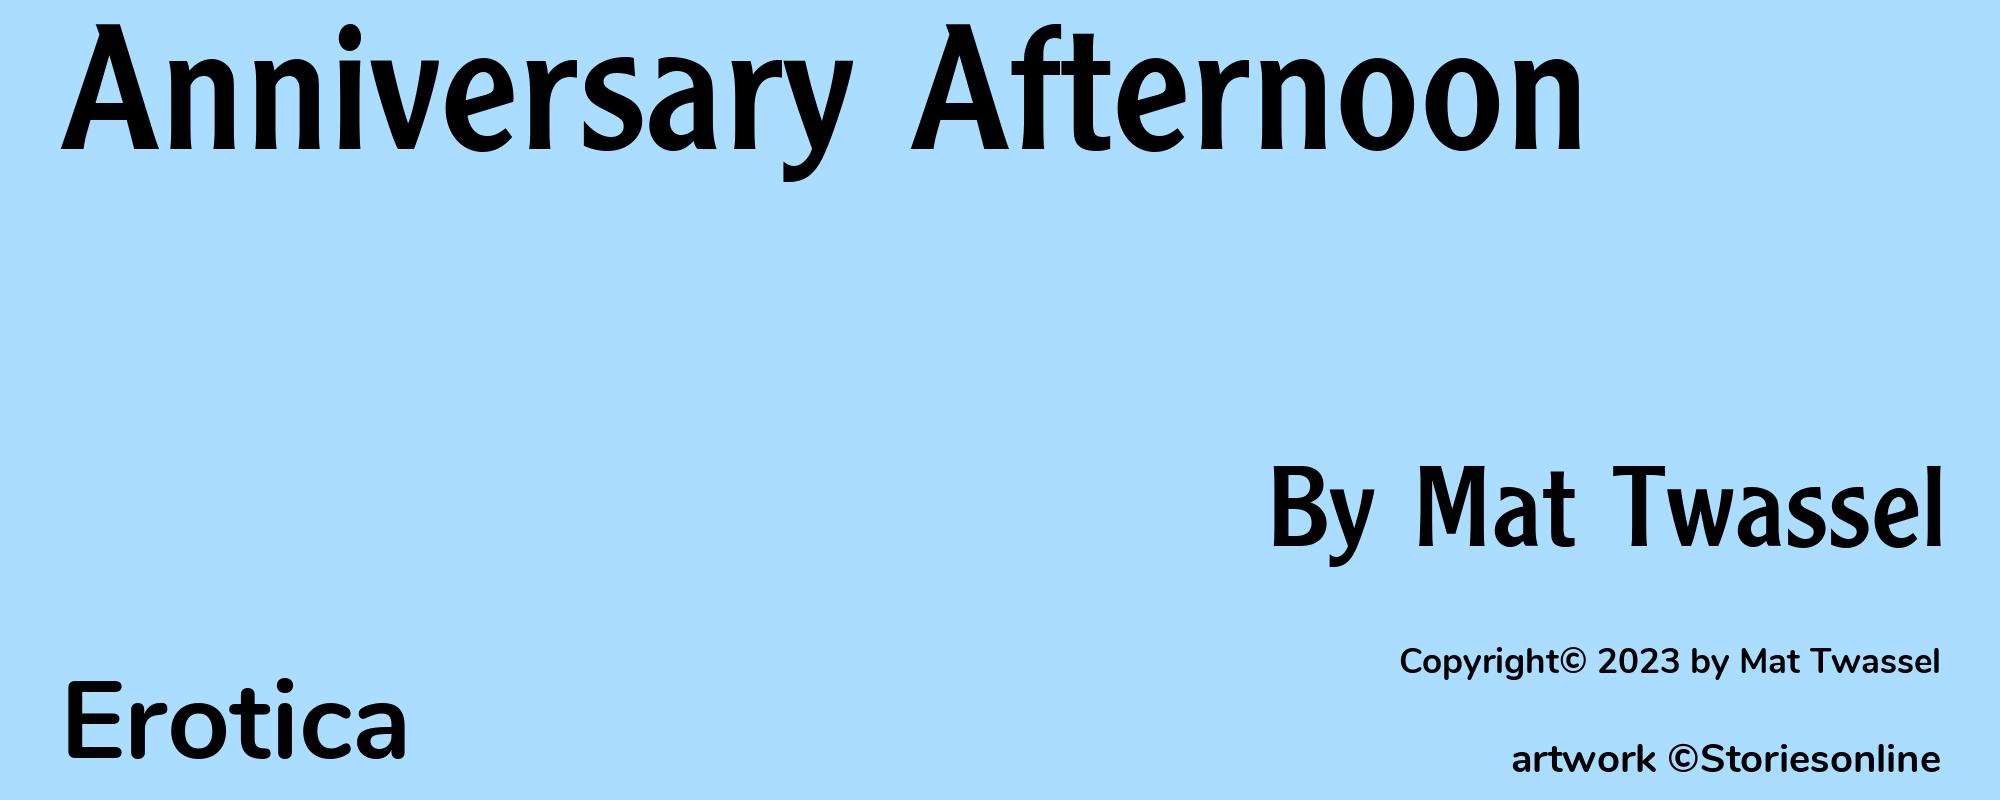 Anniversary Afternoon - Cover